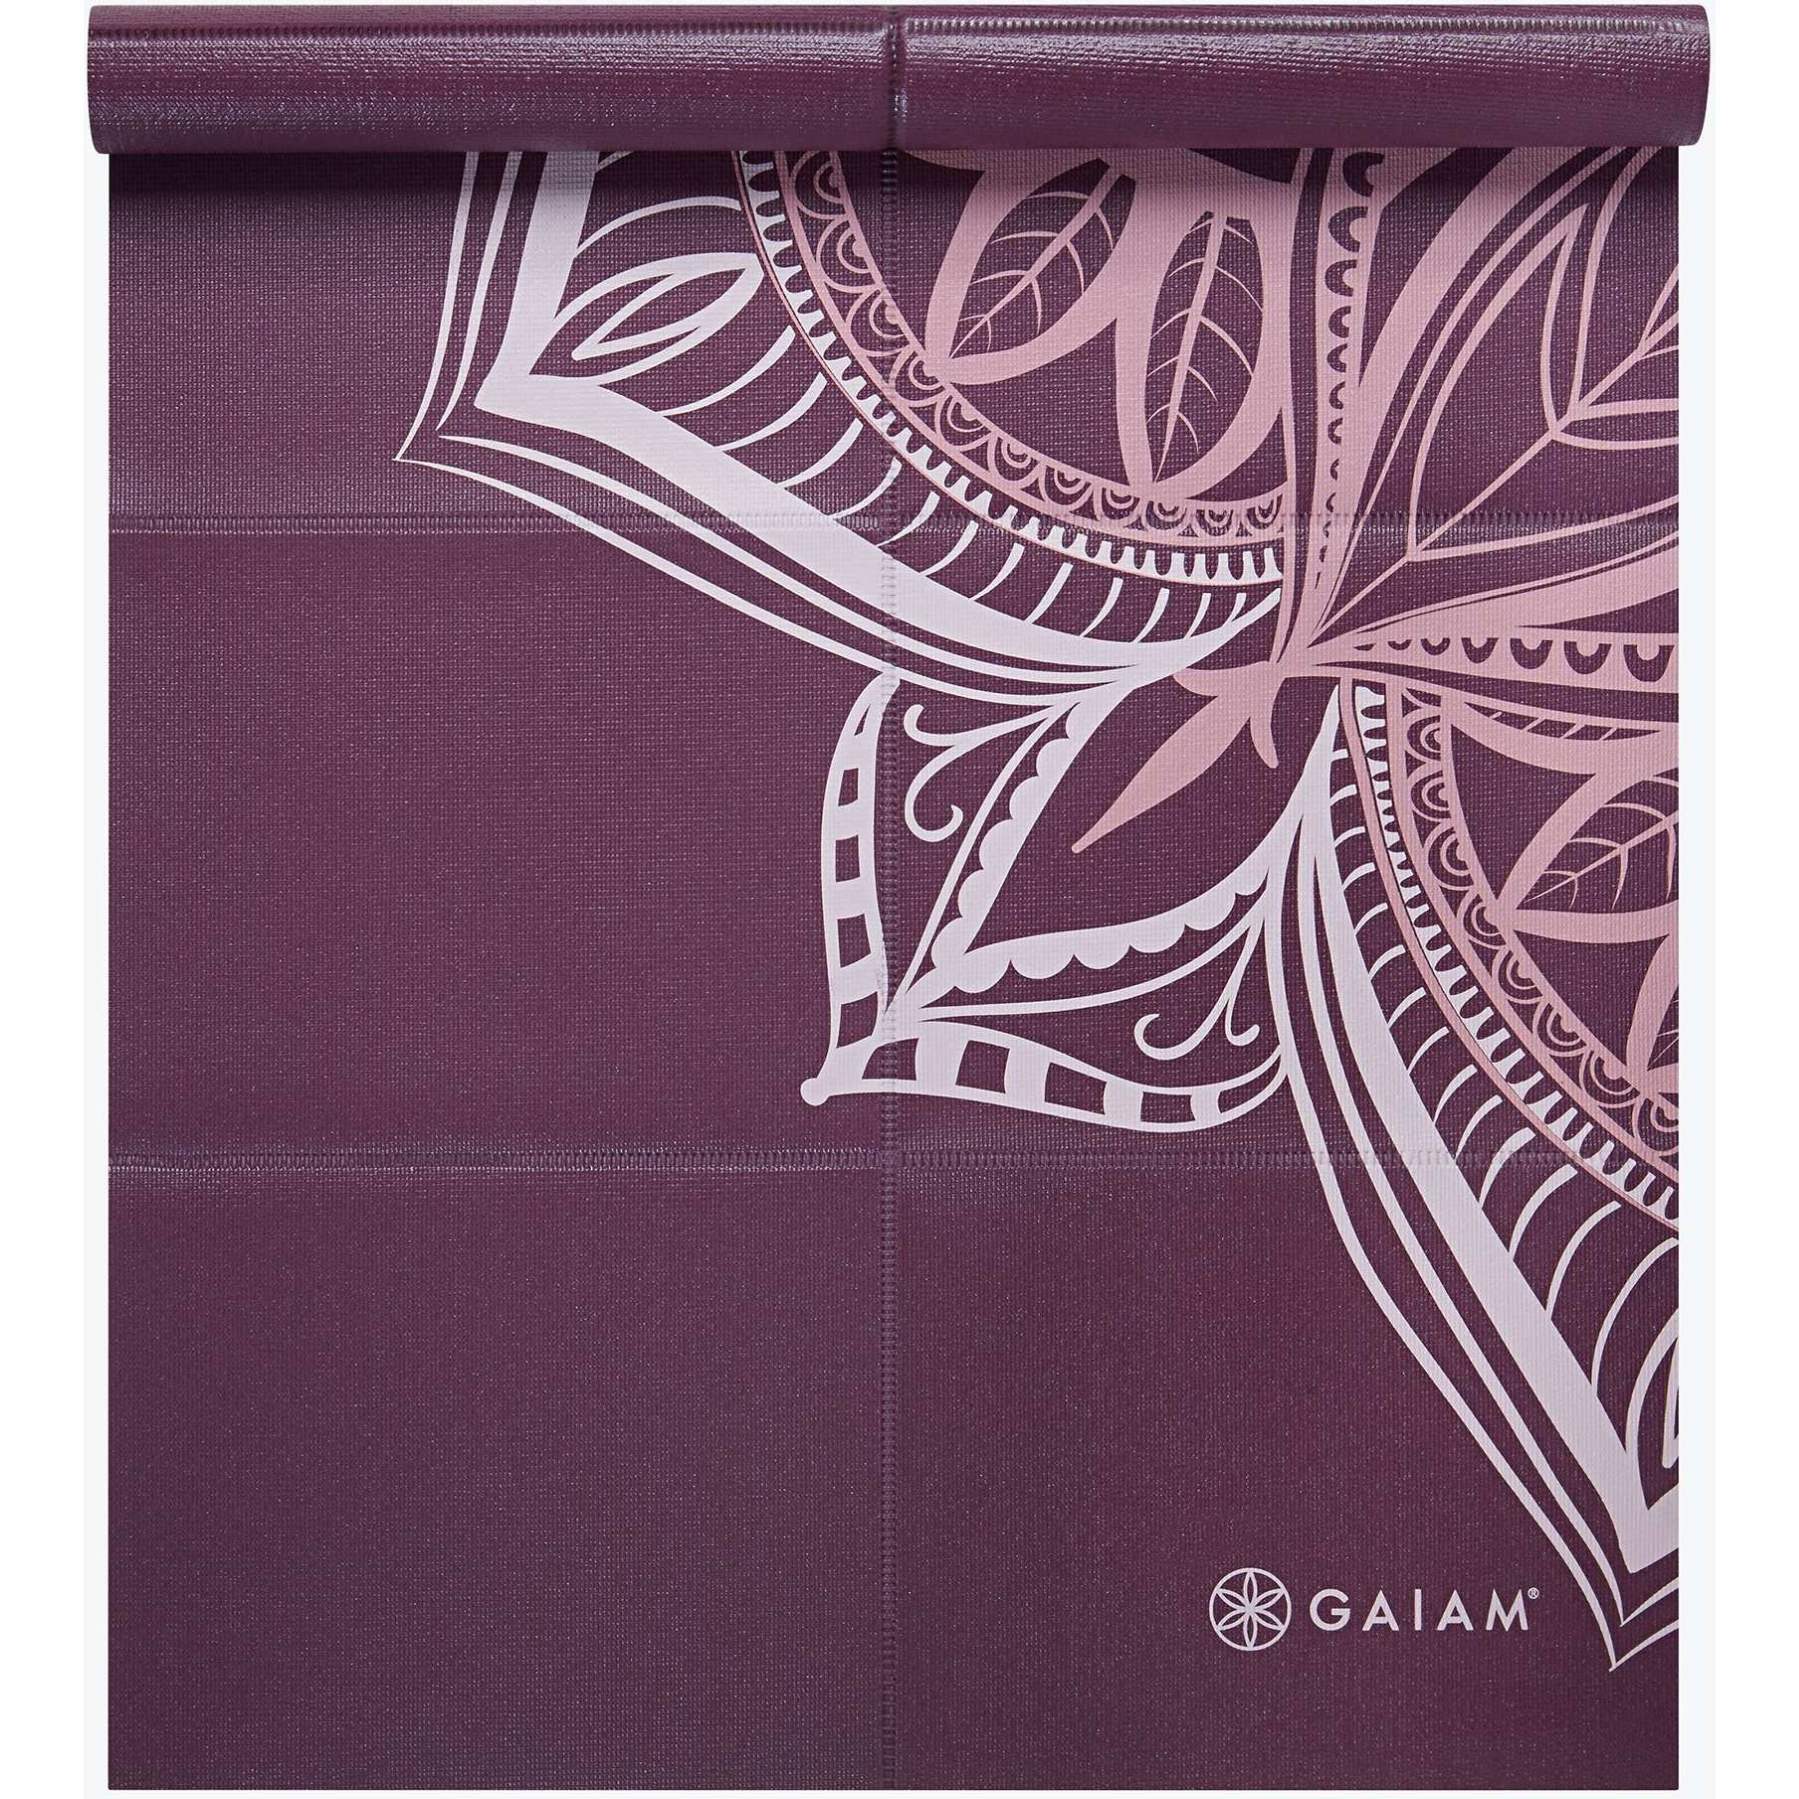 Cranberry Point) - Gaiam Yoga Mat - Folding Travel Fitness & Exercise Mat - Foldable  Yoga Mat for All Types of Yoga, Pilates & Floor Workouts (68L x 24W